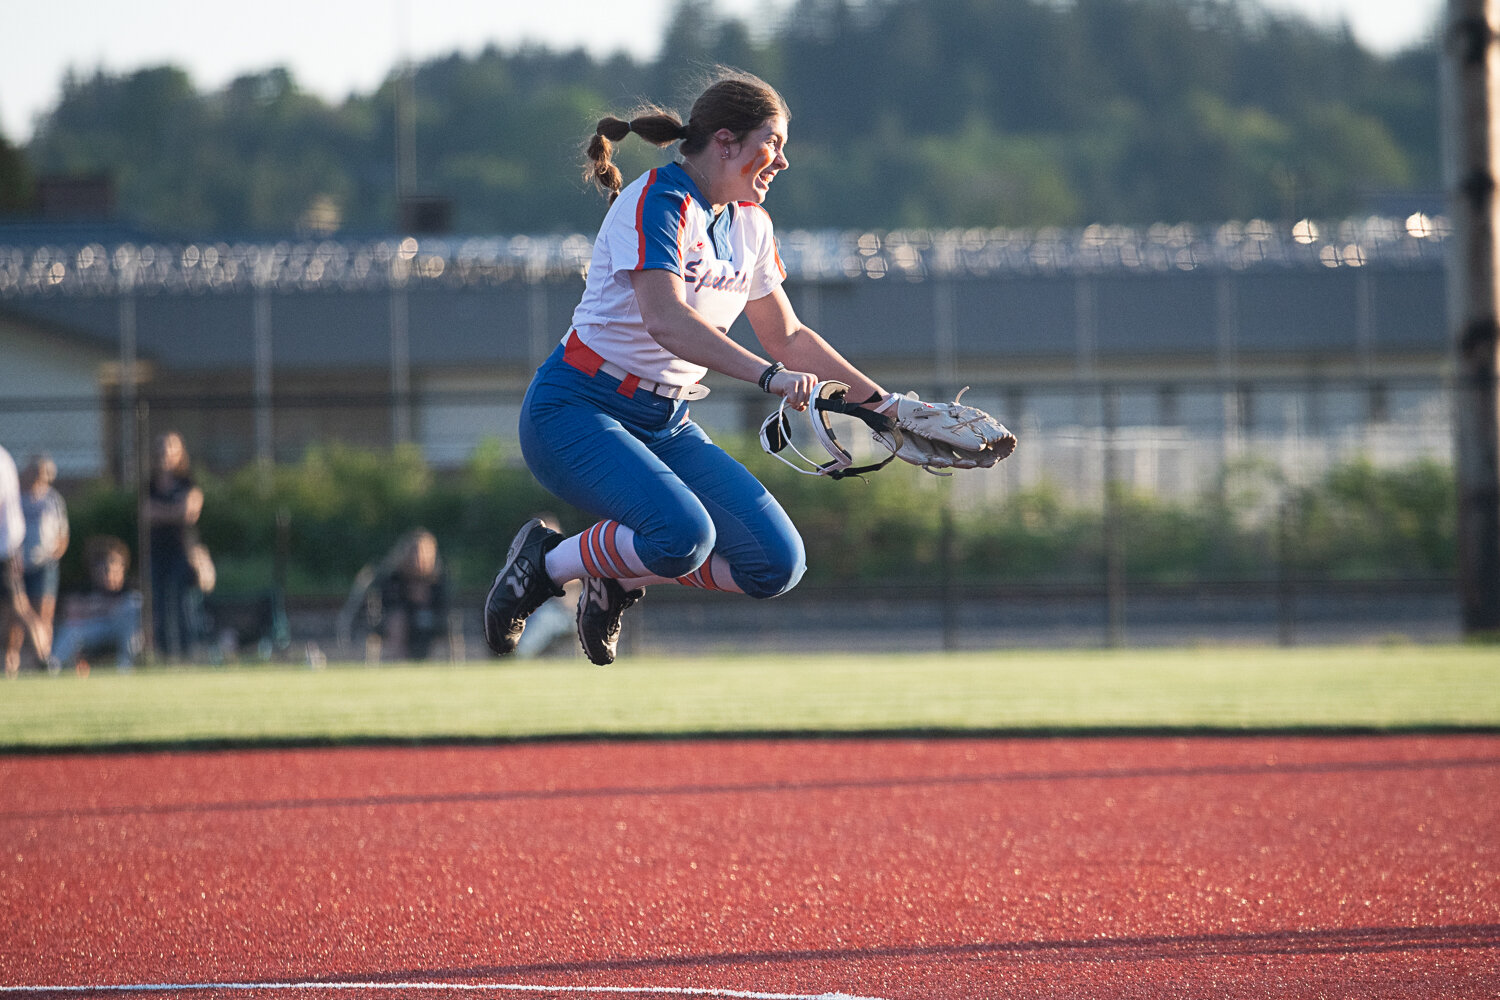 Elizabeth Peery jumps for joy after the final out of Ridgefield's 4-3 win over Tumwater in the semifinals of the the 2A District 4 tournament on May 18 at Rec Park in Chehalis.